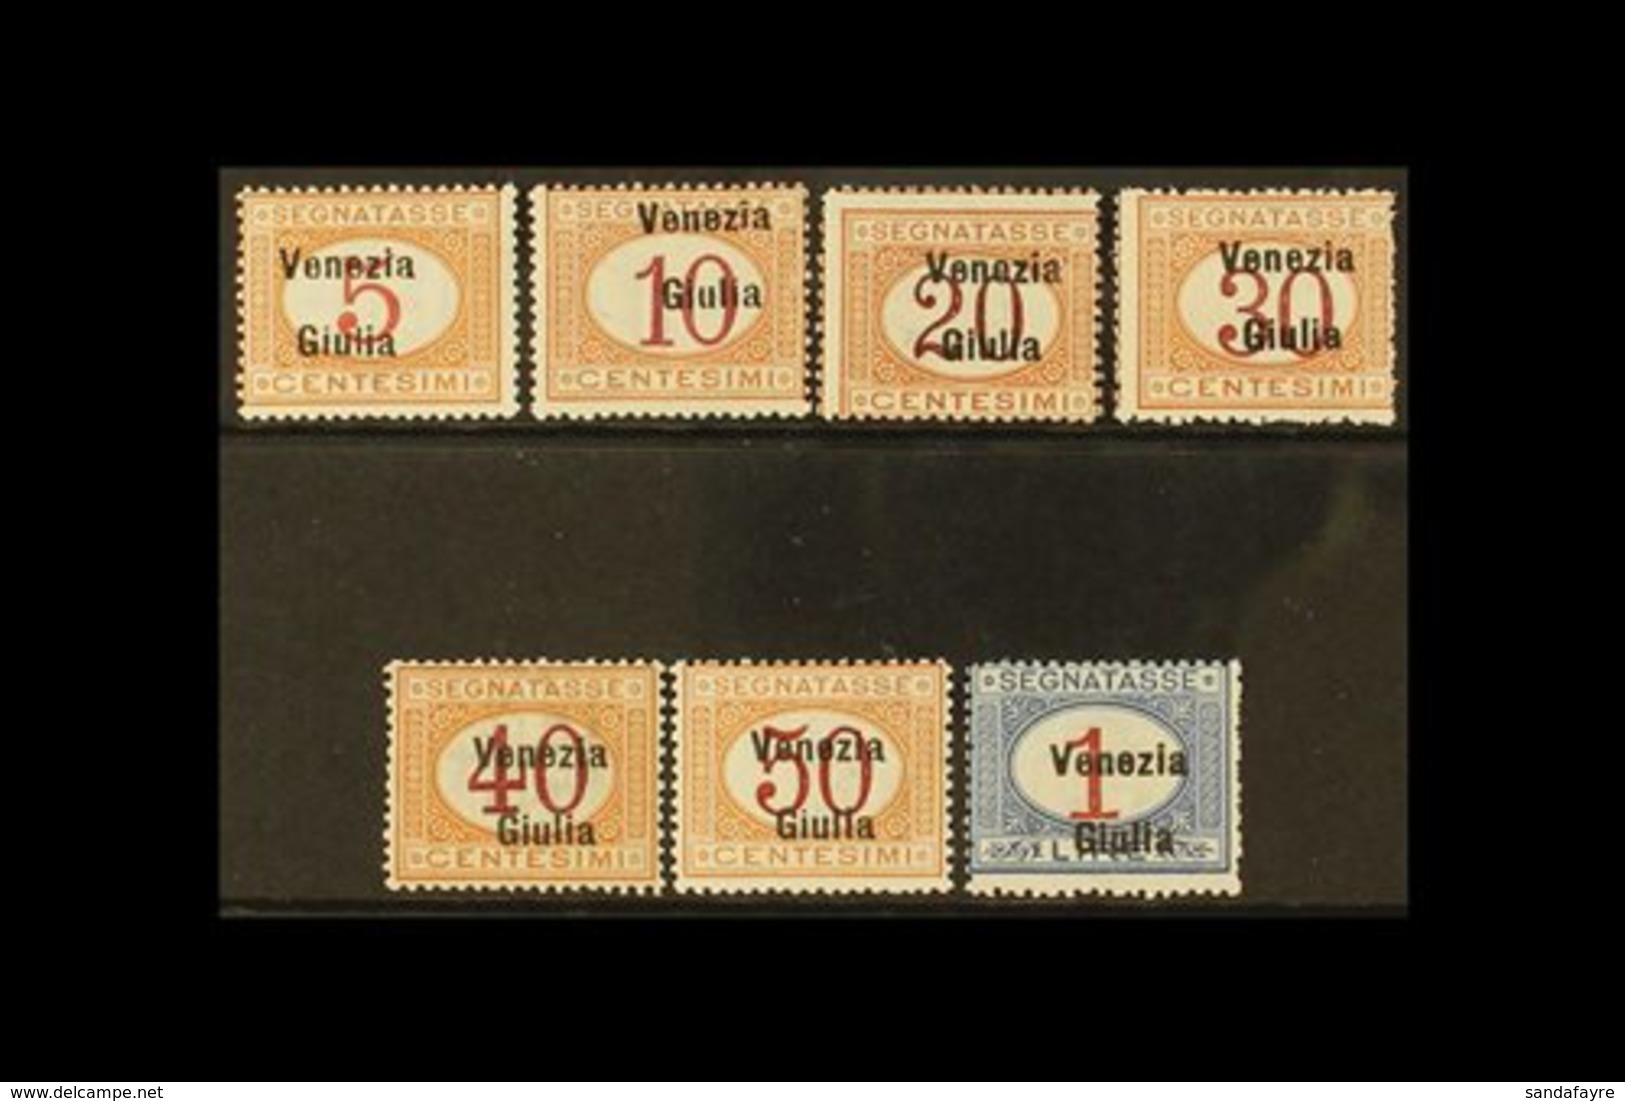 VENEZIA GIULIA POSTAGE DUES 1918 Set Complete, Sass S4, Never Hinged Mint. 1L Rough Perfs At Right. Cat €2500 (£2125) (7 - Unclassified